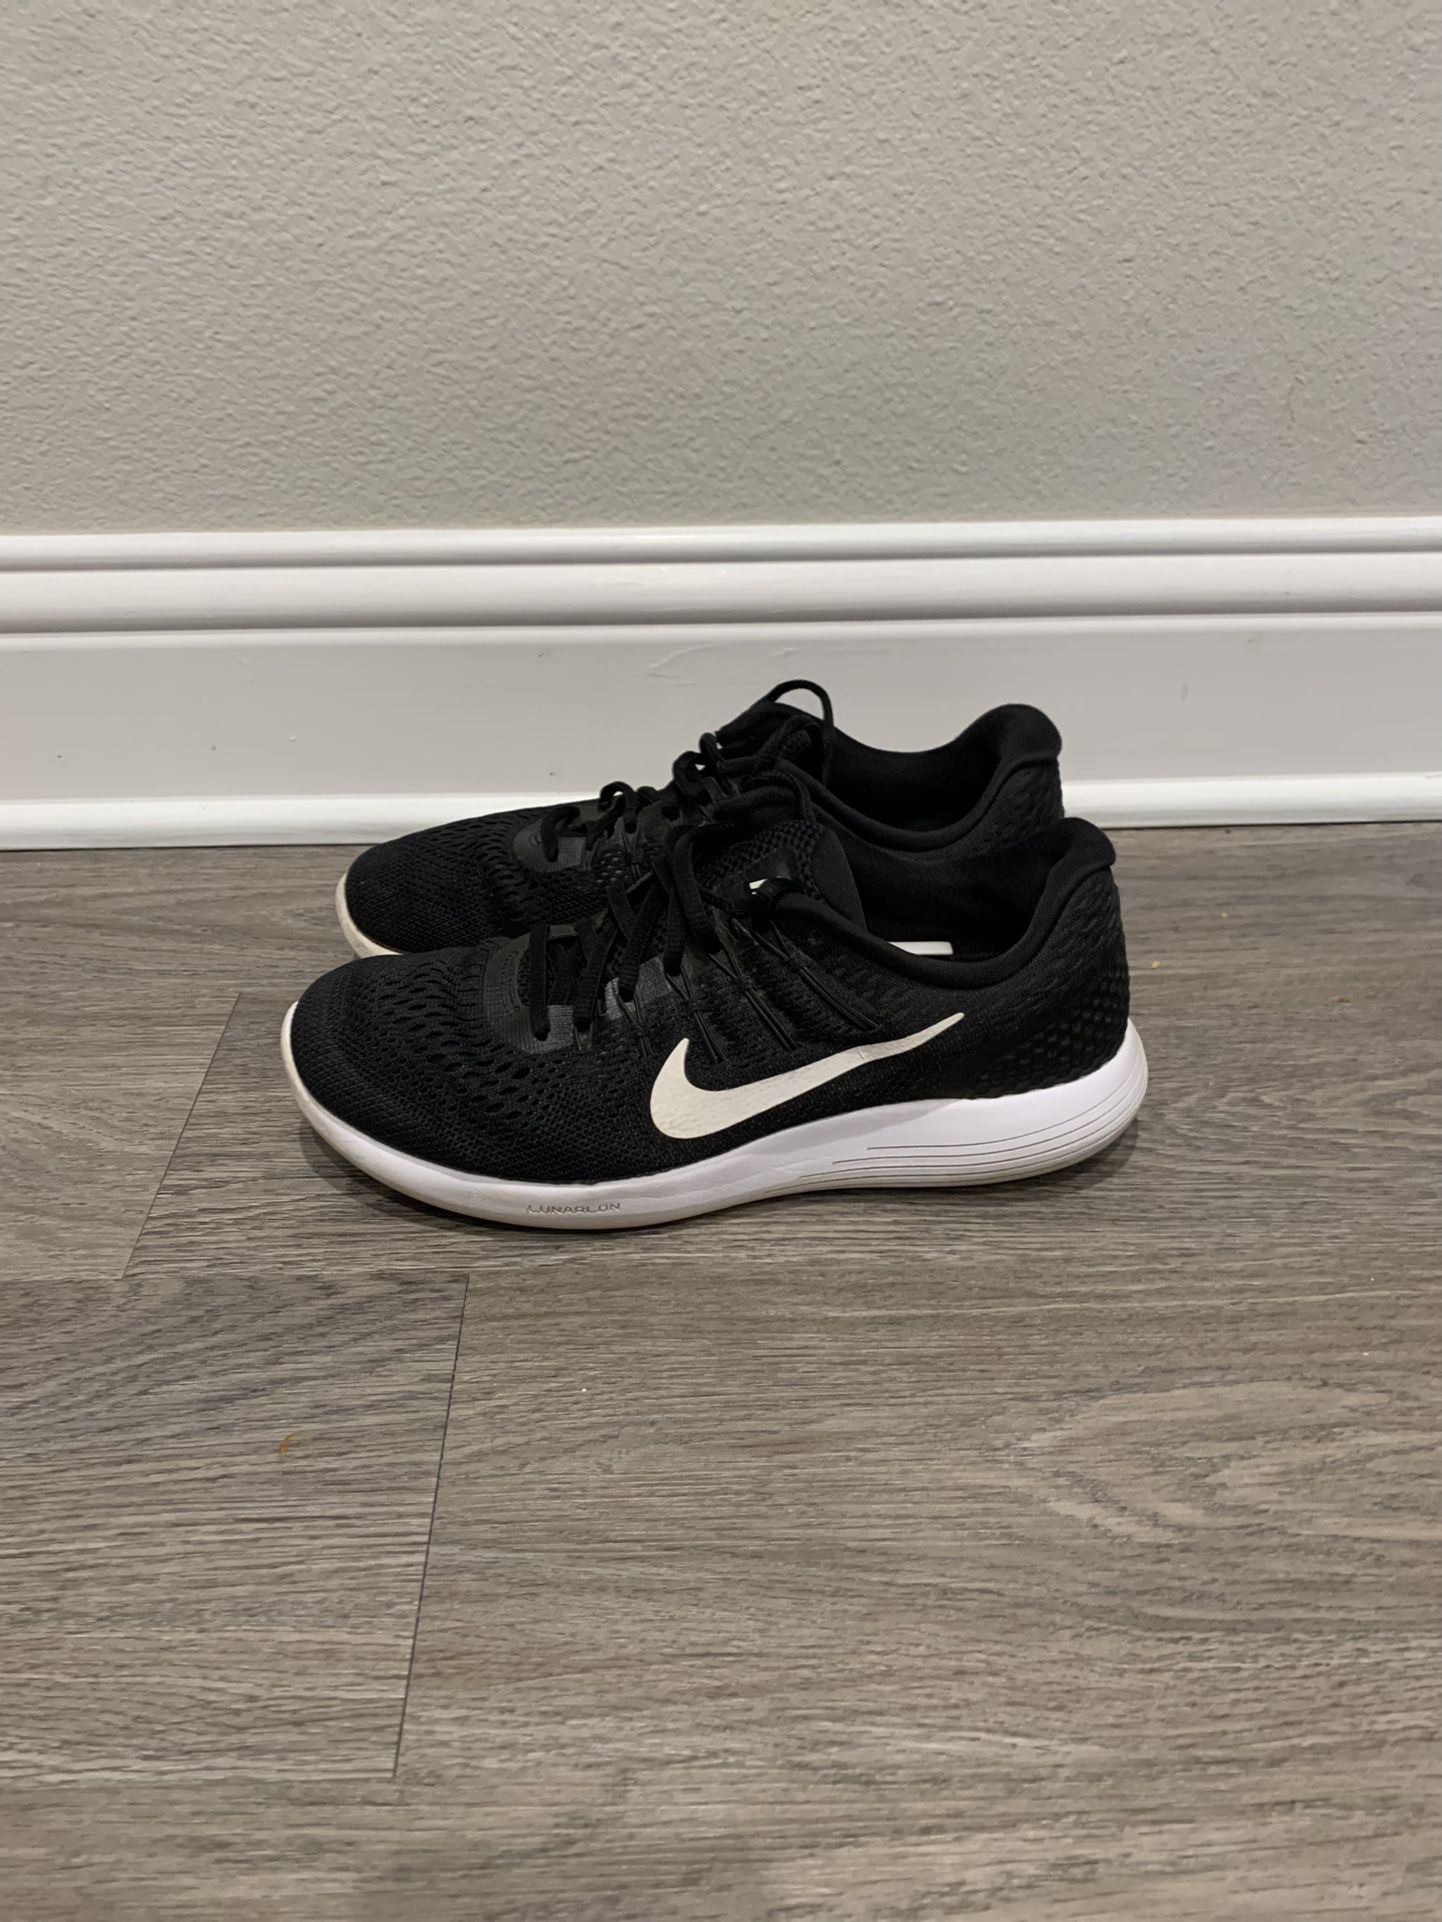 Adidas x LV tennis shoes for Sale in McKinney, TX - OfferUp